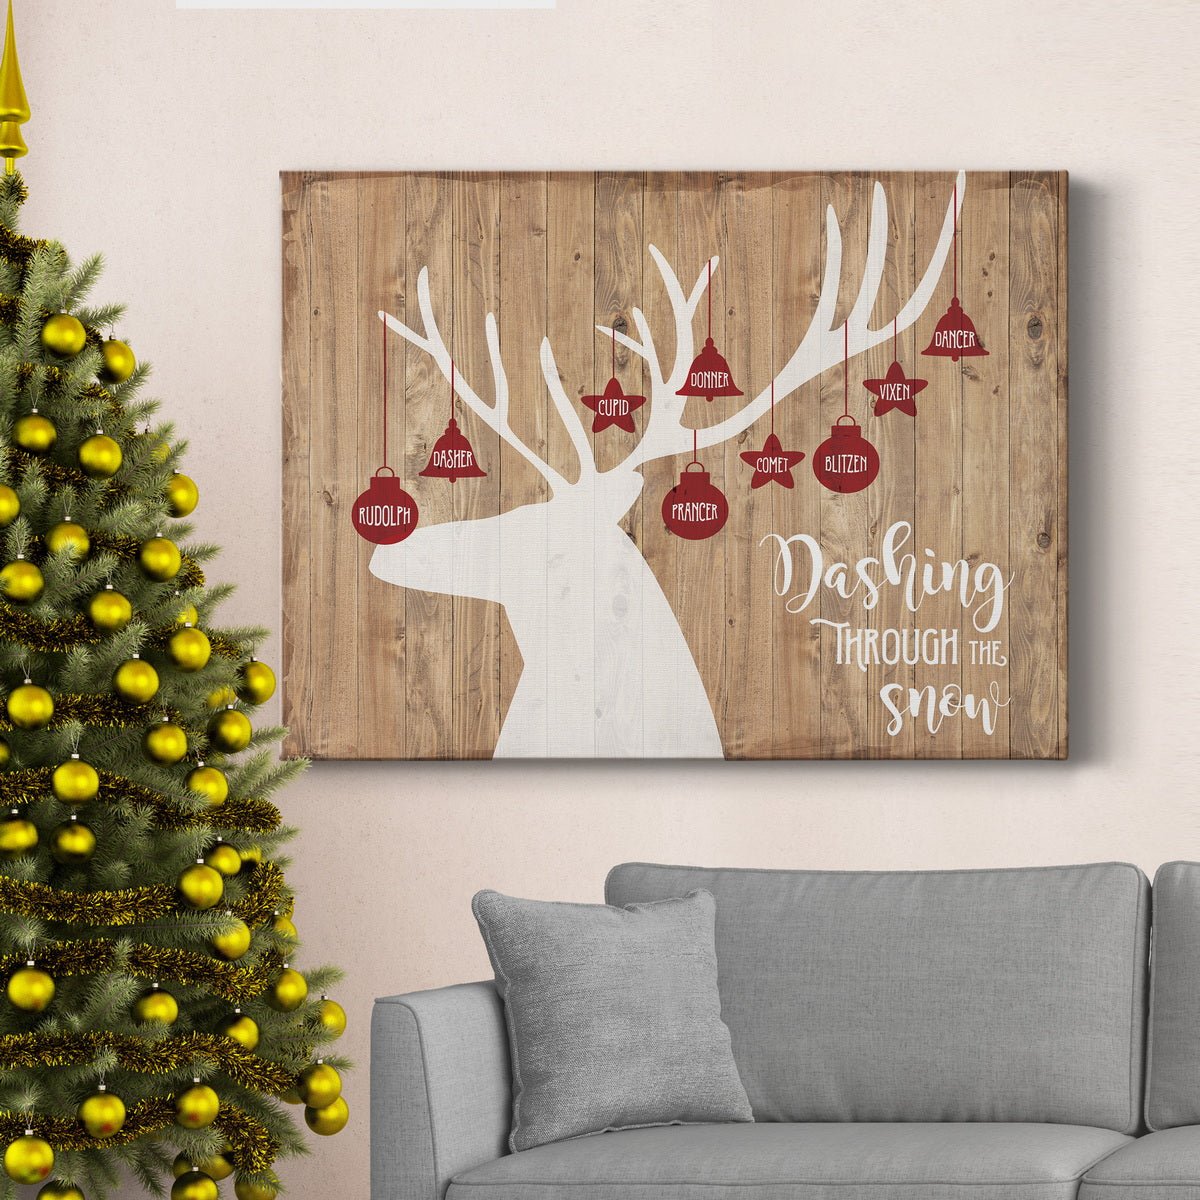 Dashing Through The Snow - Premium Gallery Wrapped Canvas  - Ready to Hang